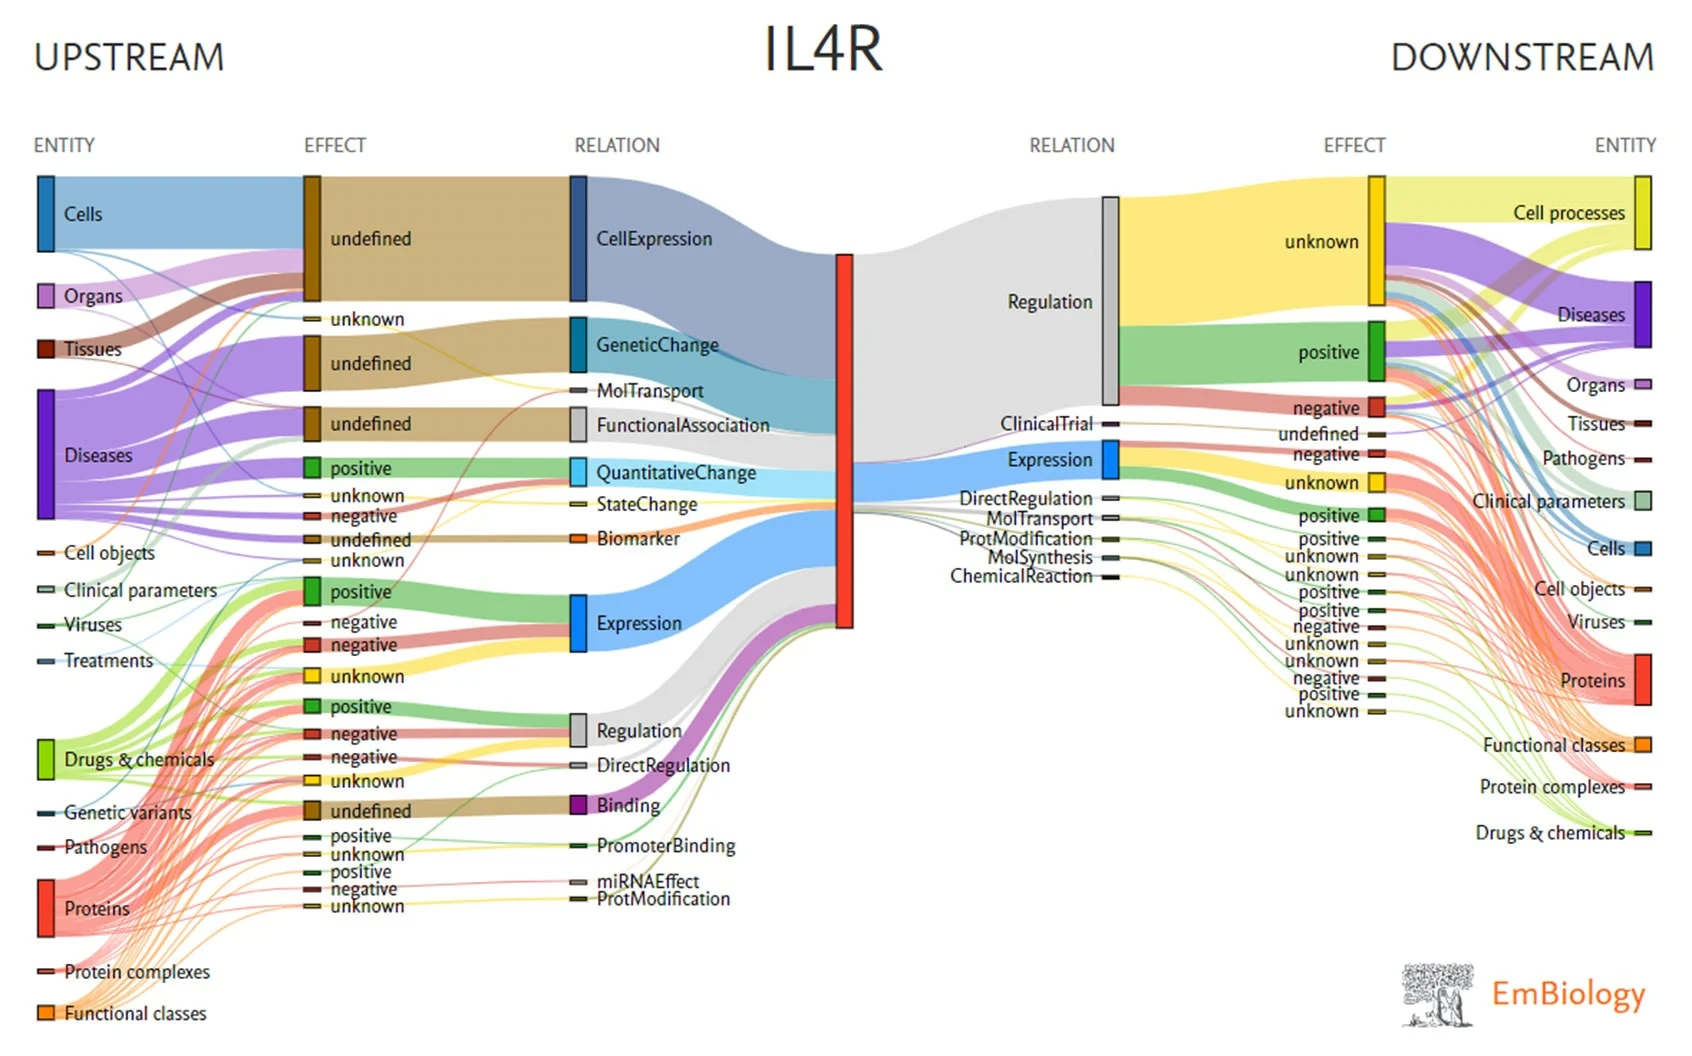 Upstream and downstream relationship, including IL4R